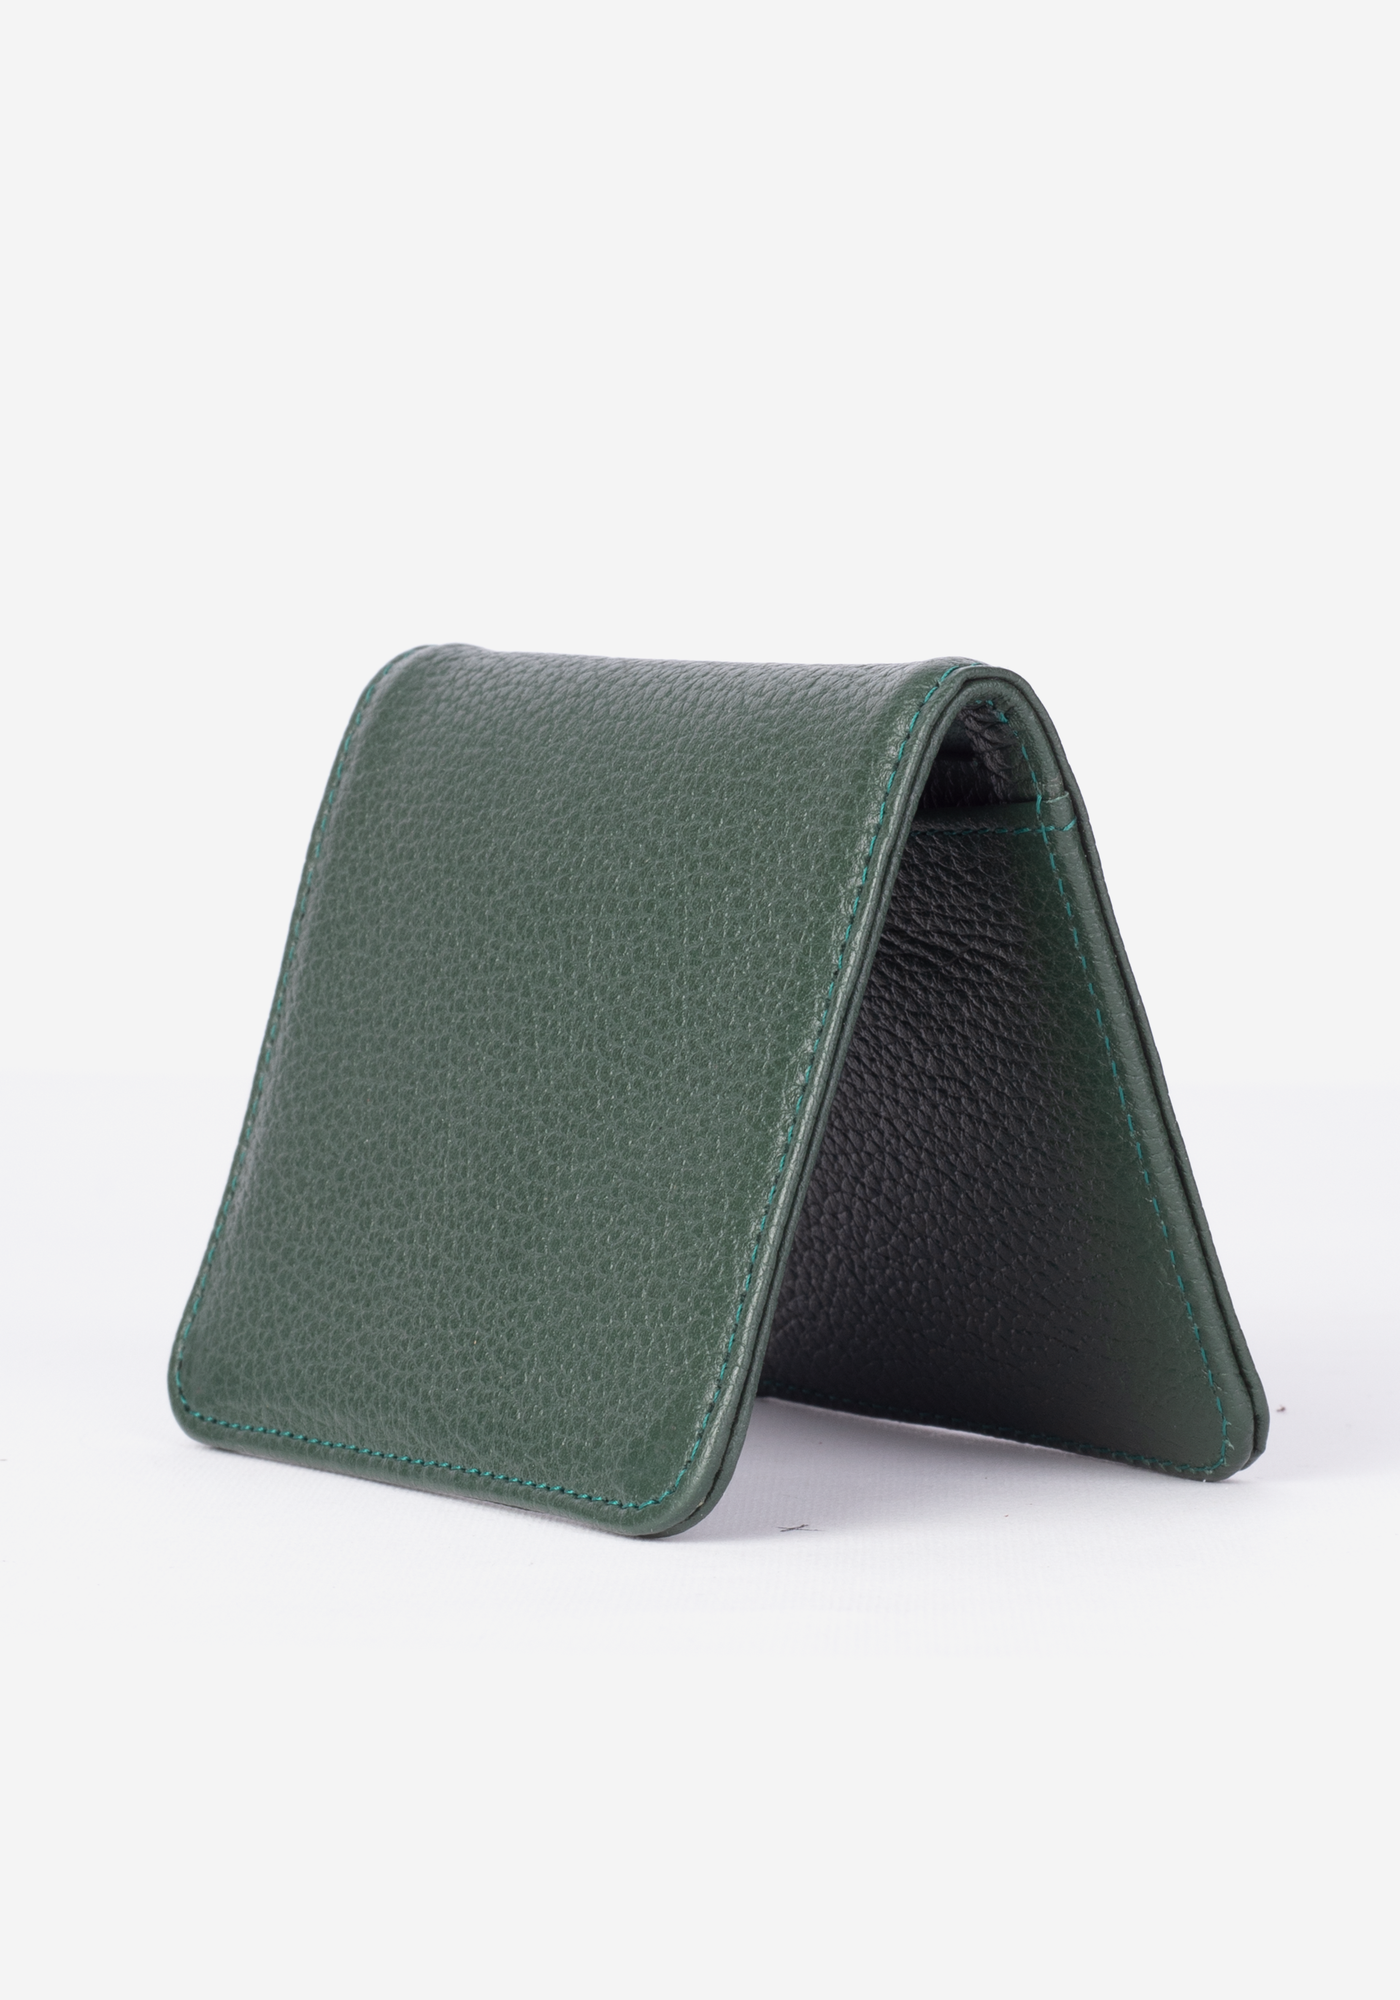 WAL020 / Green Leather Wallet